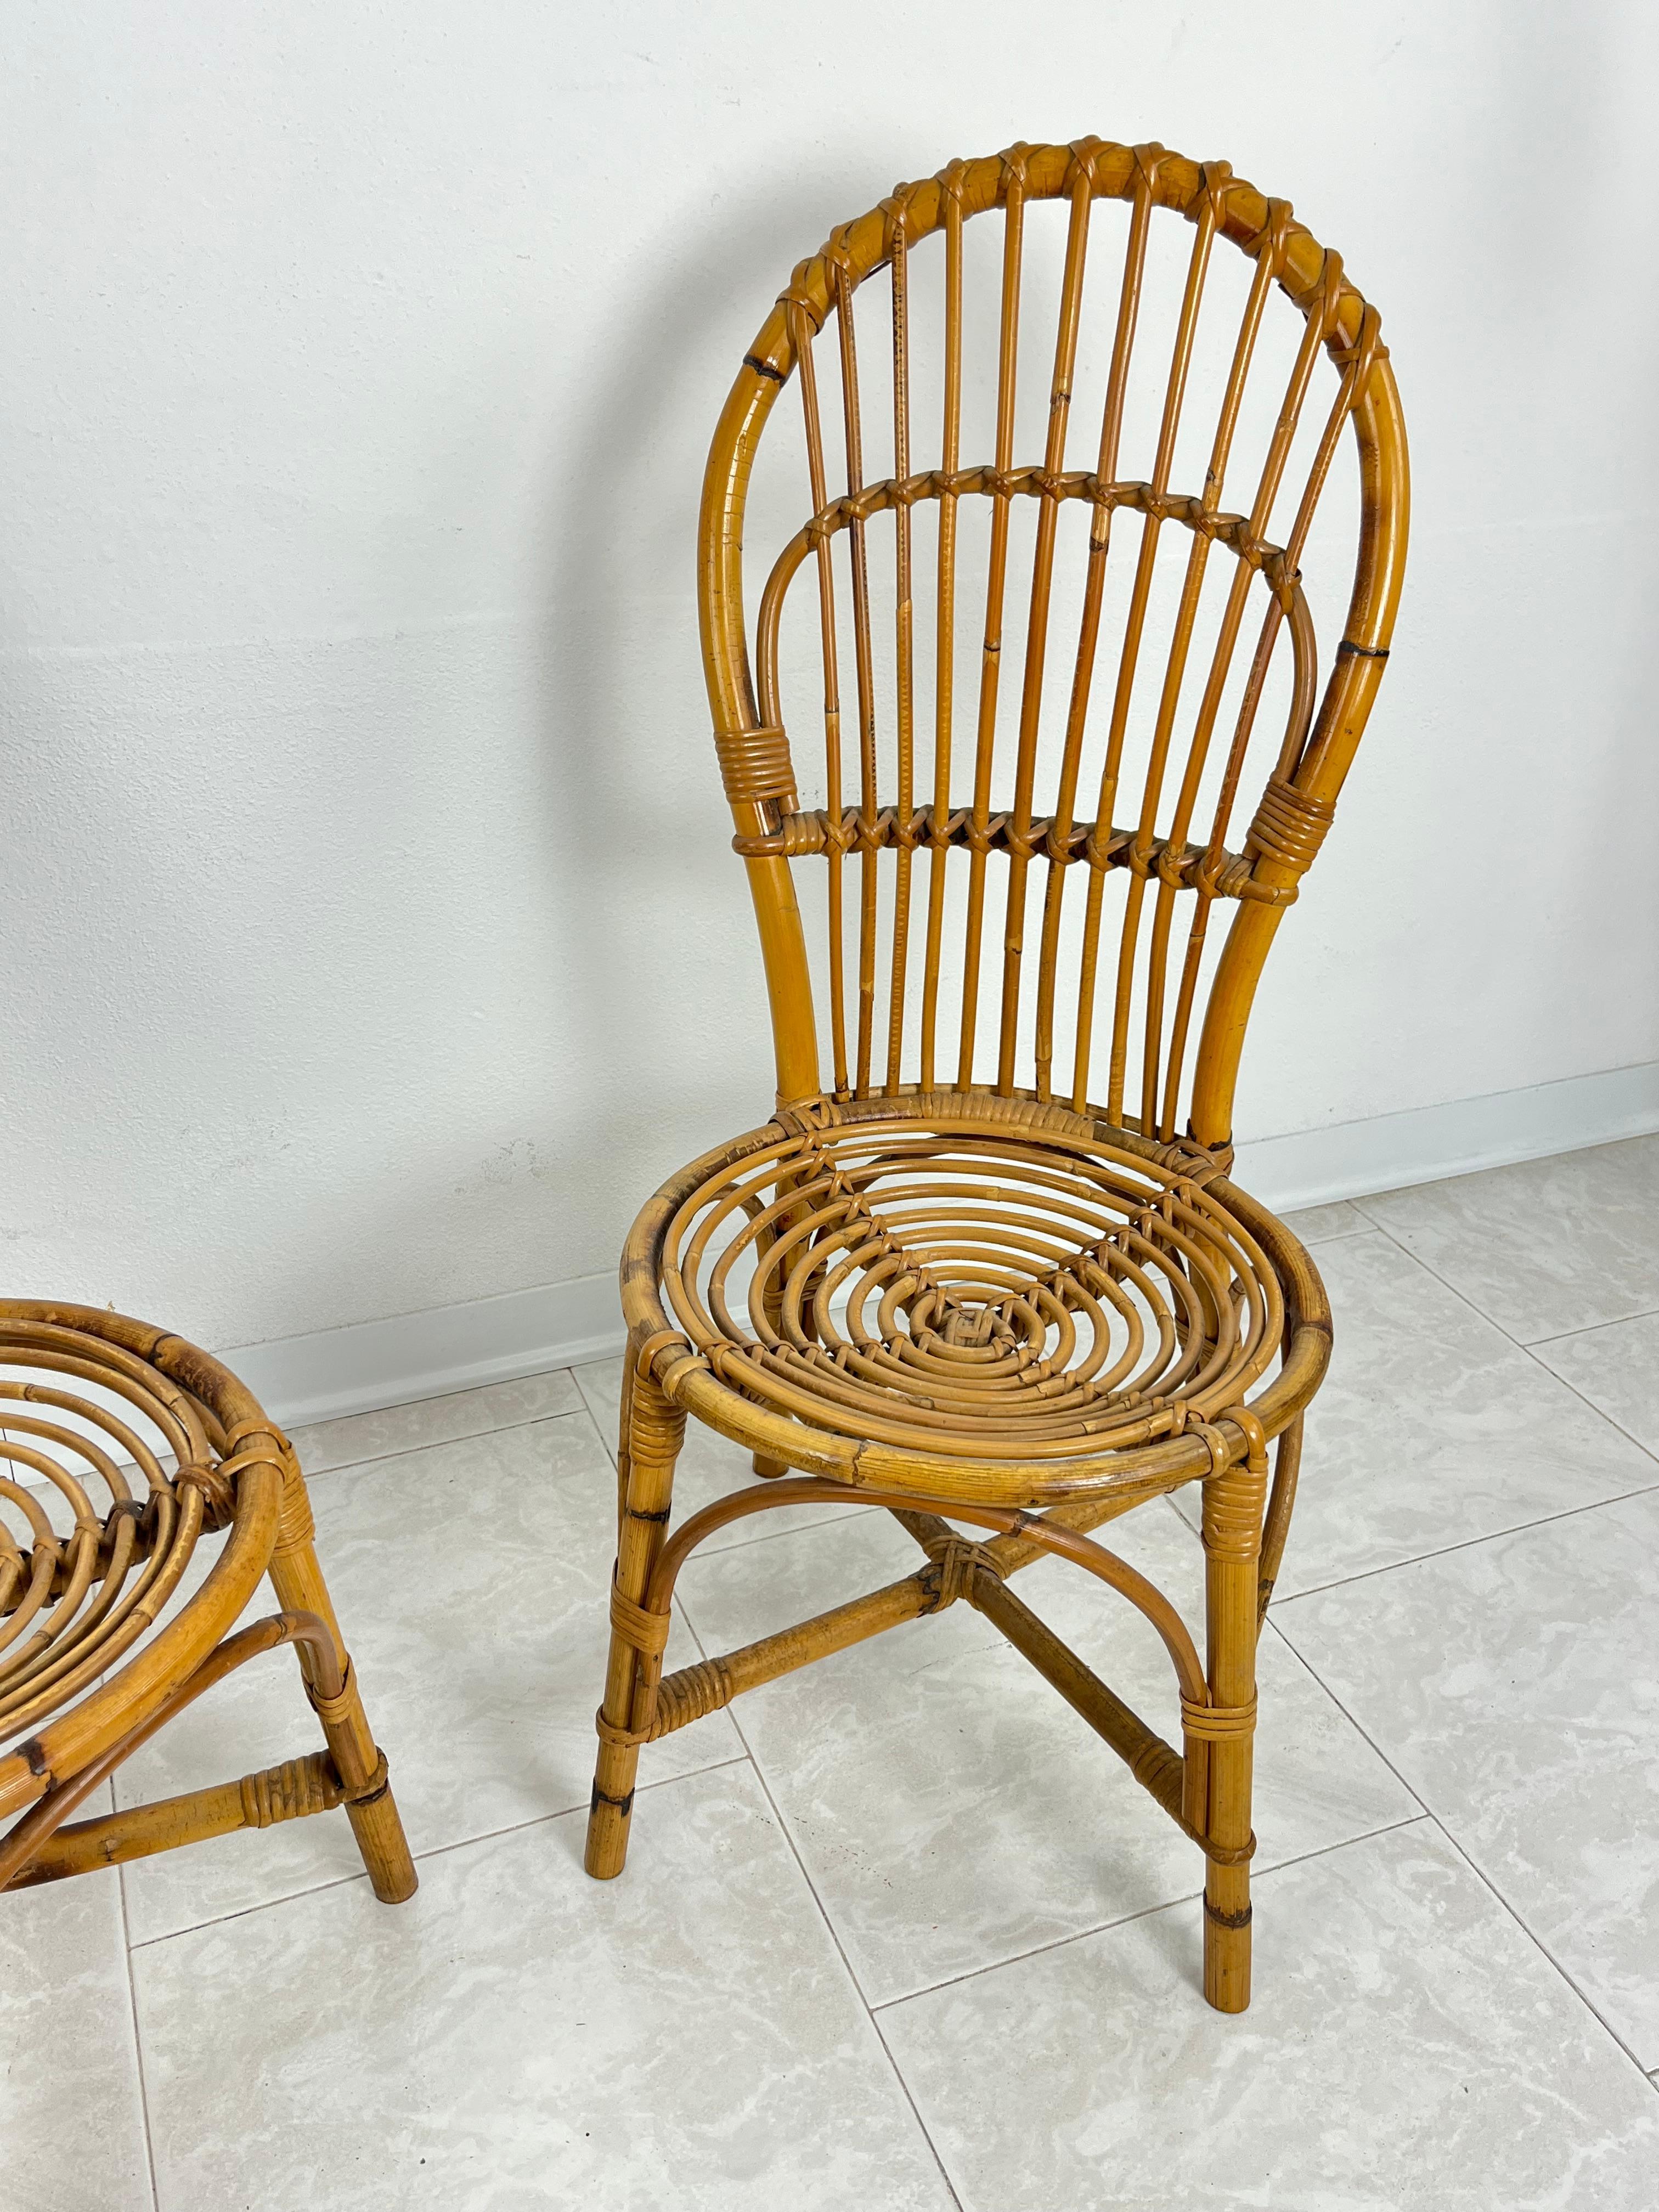 Set of 2 Small Mid-Century Bamboo Chairs, Italian Design 1950s For Sale 3